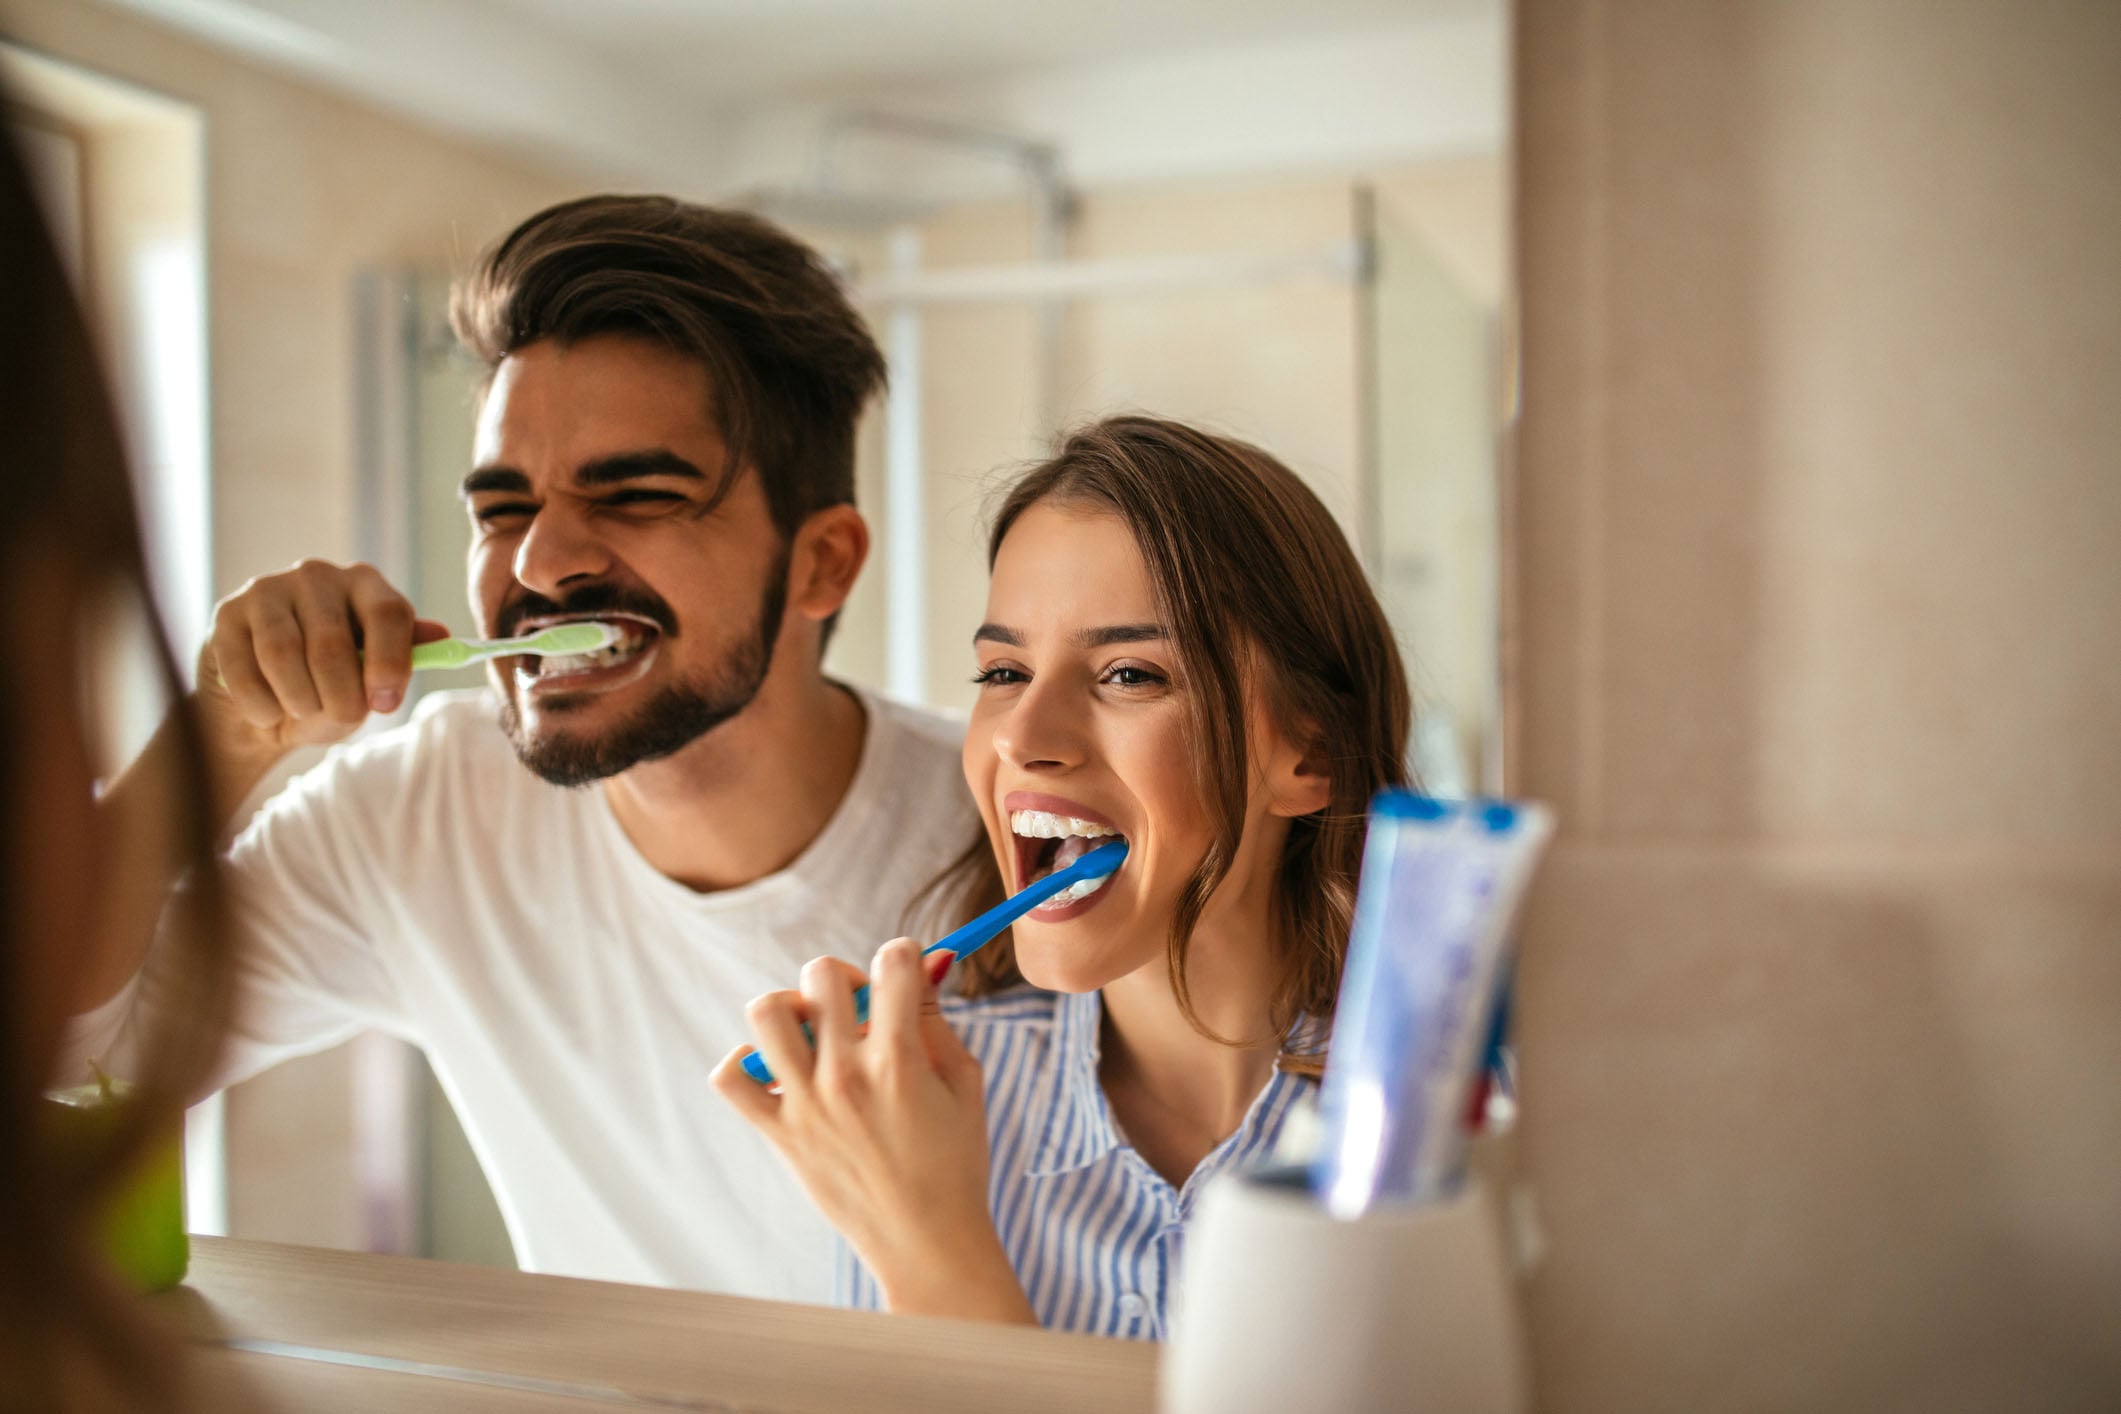 How to brush your teeth properly in 5 easy steps